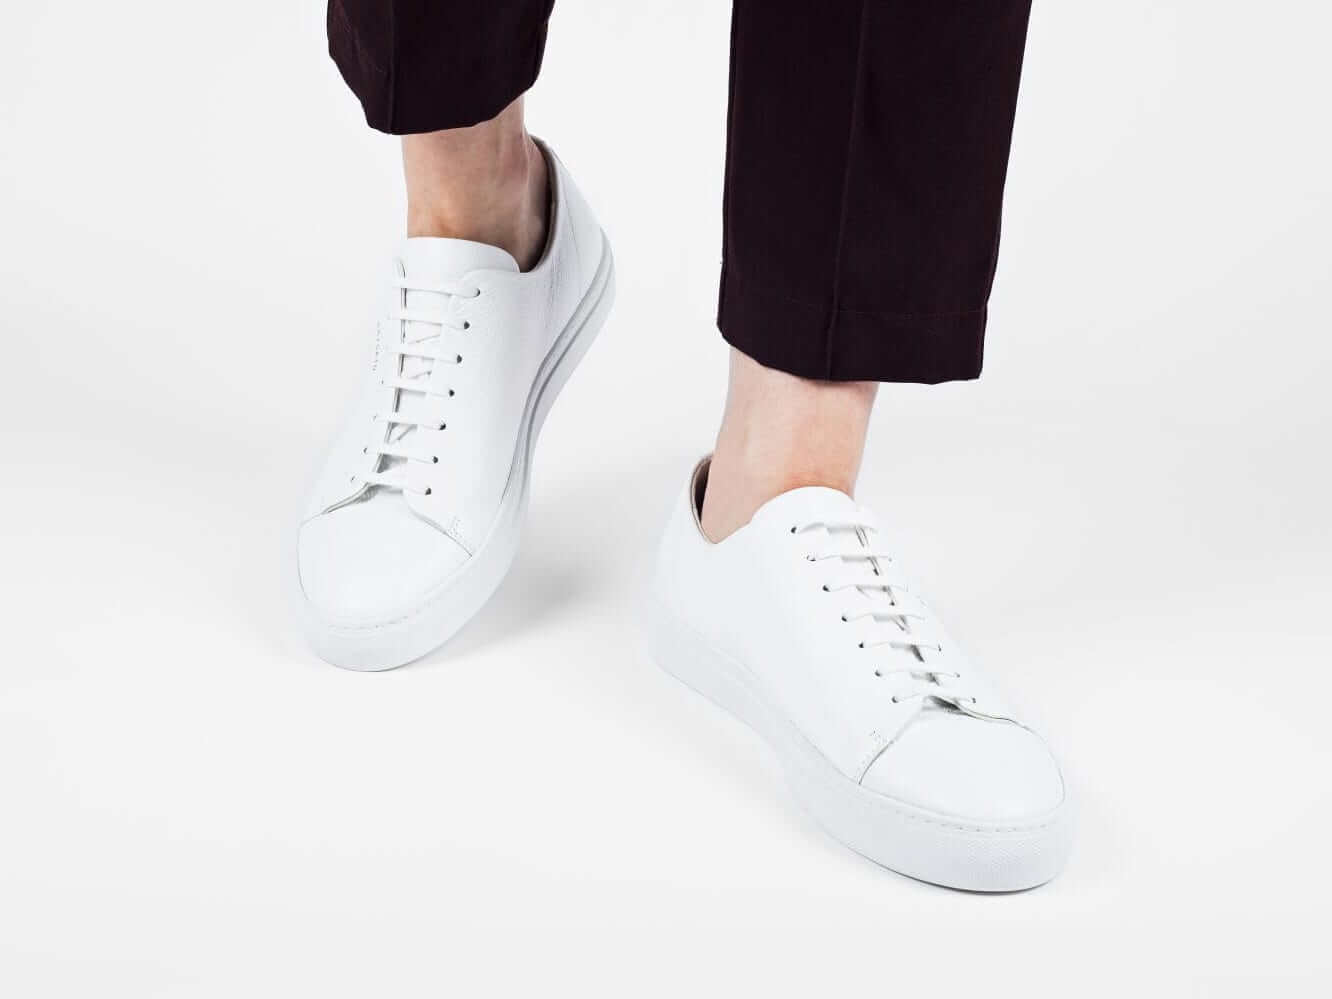 Pairs of Women's White Sneakers that are Not Common Projects — DeFolio